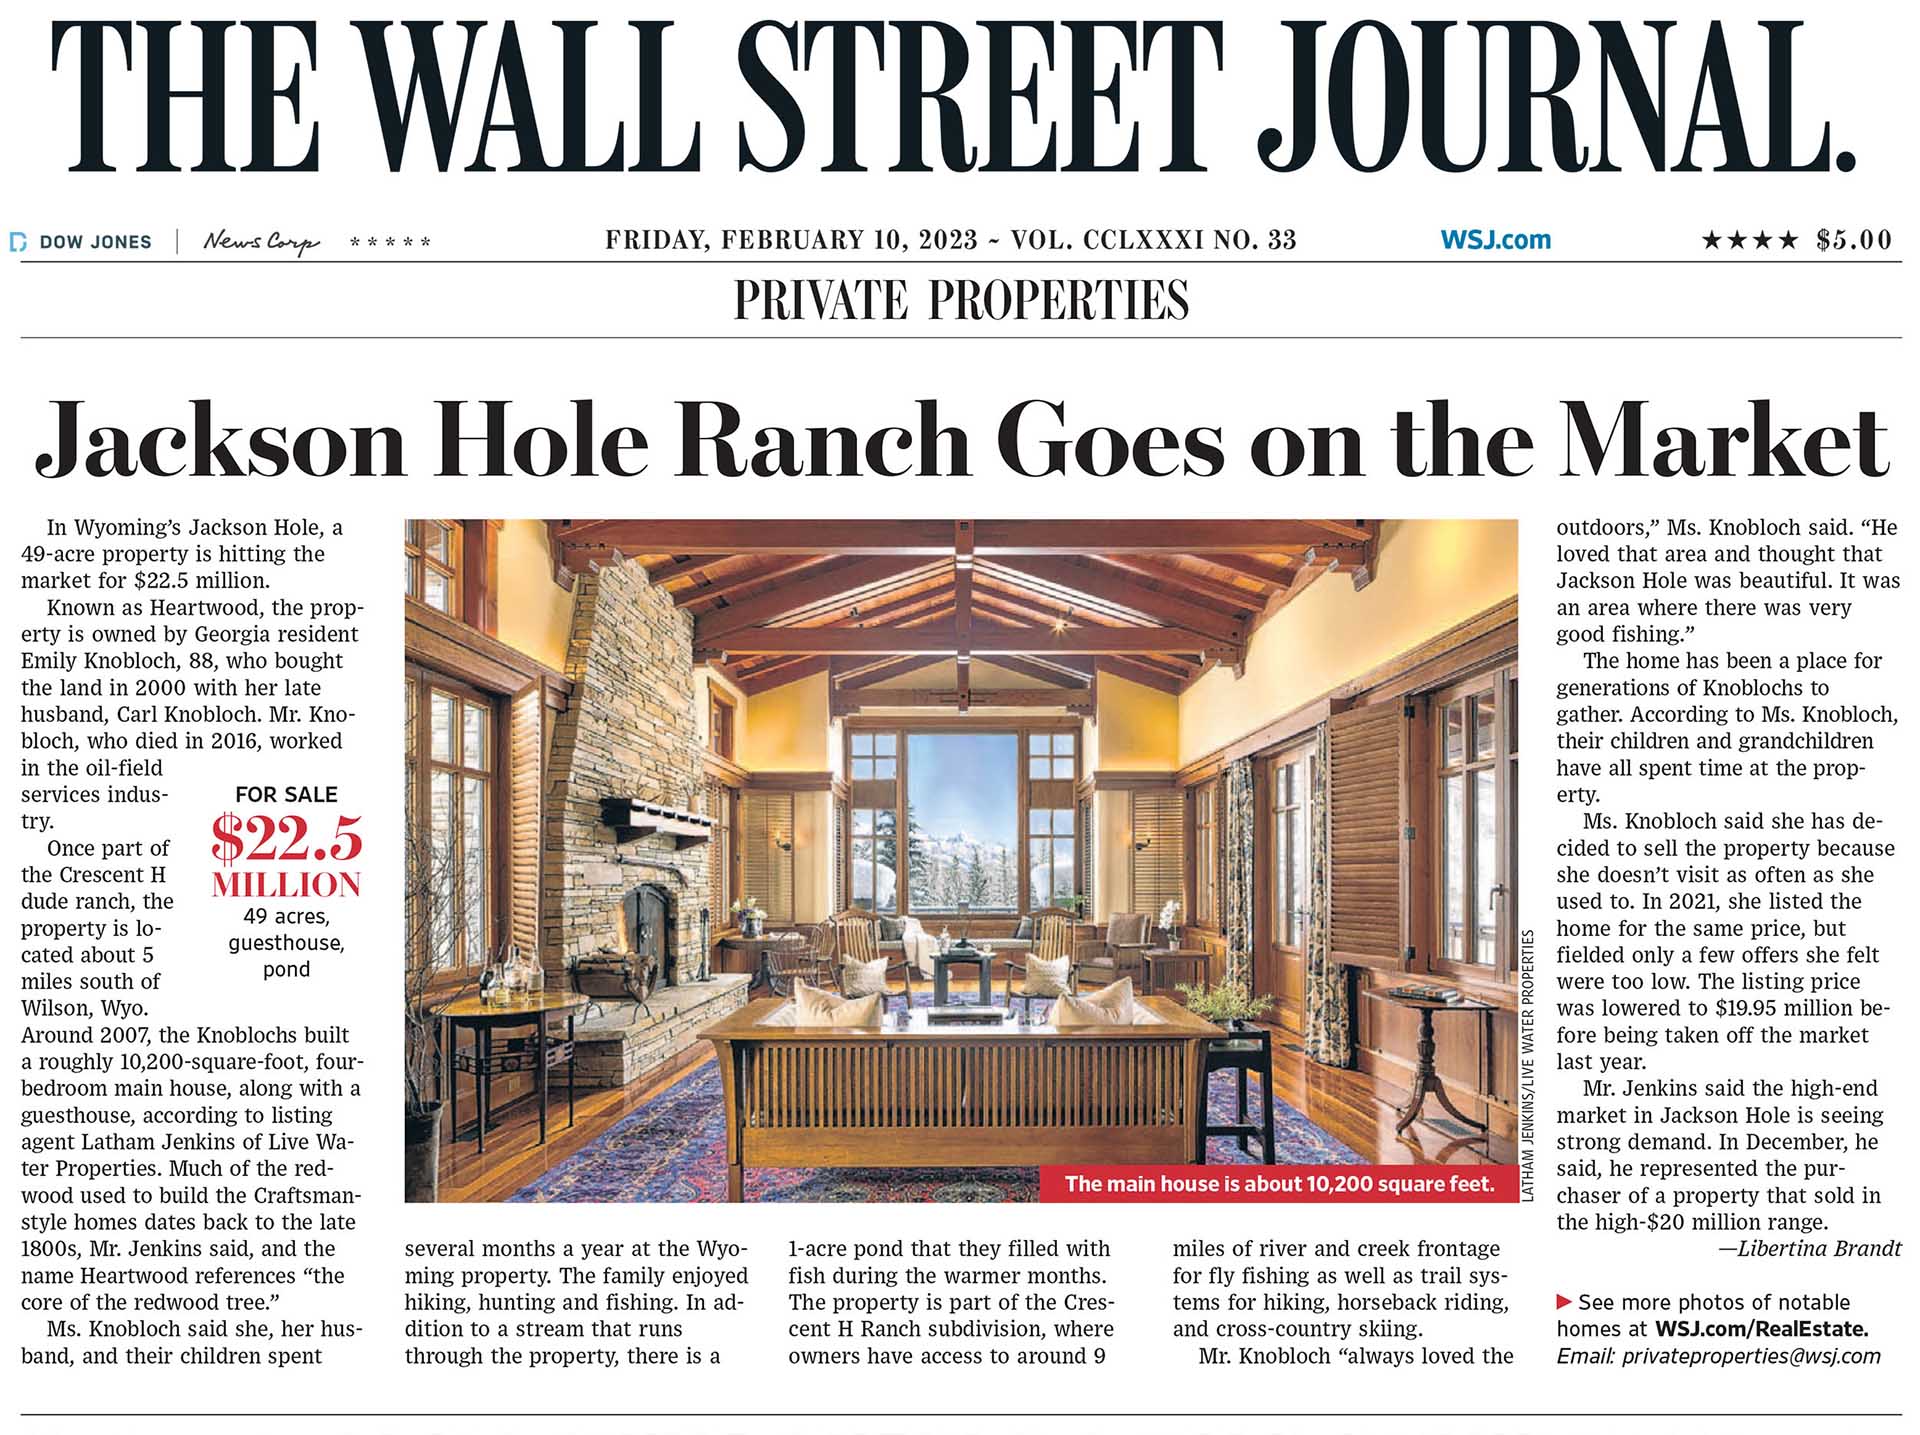 Heartwood in Crescent H Ranch - Wall Street Journal